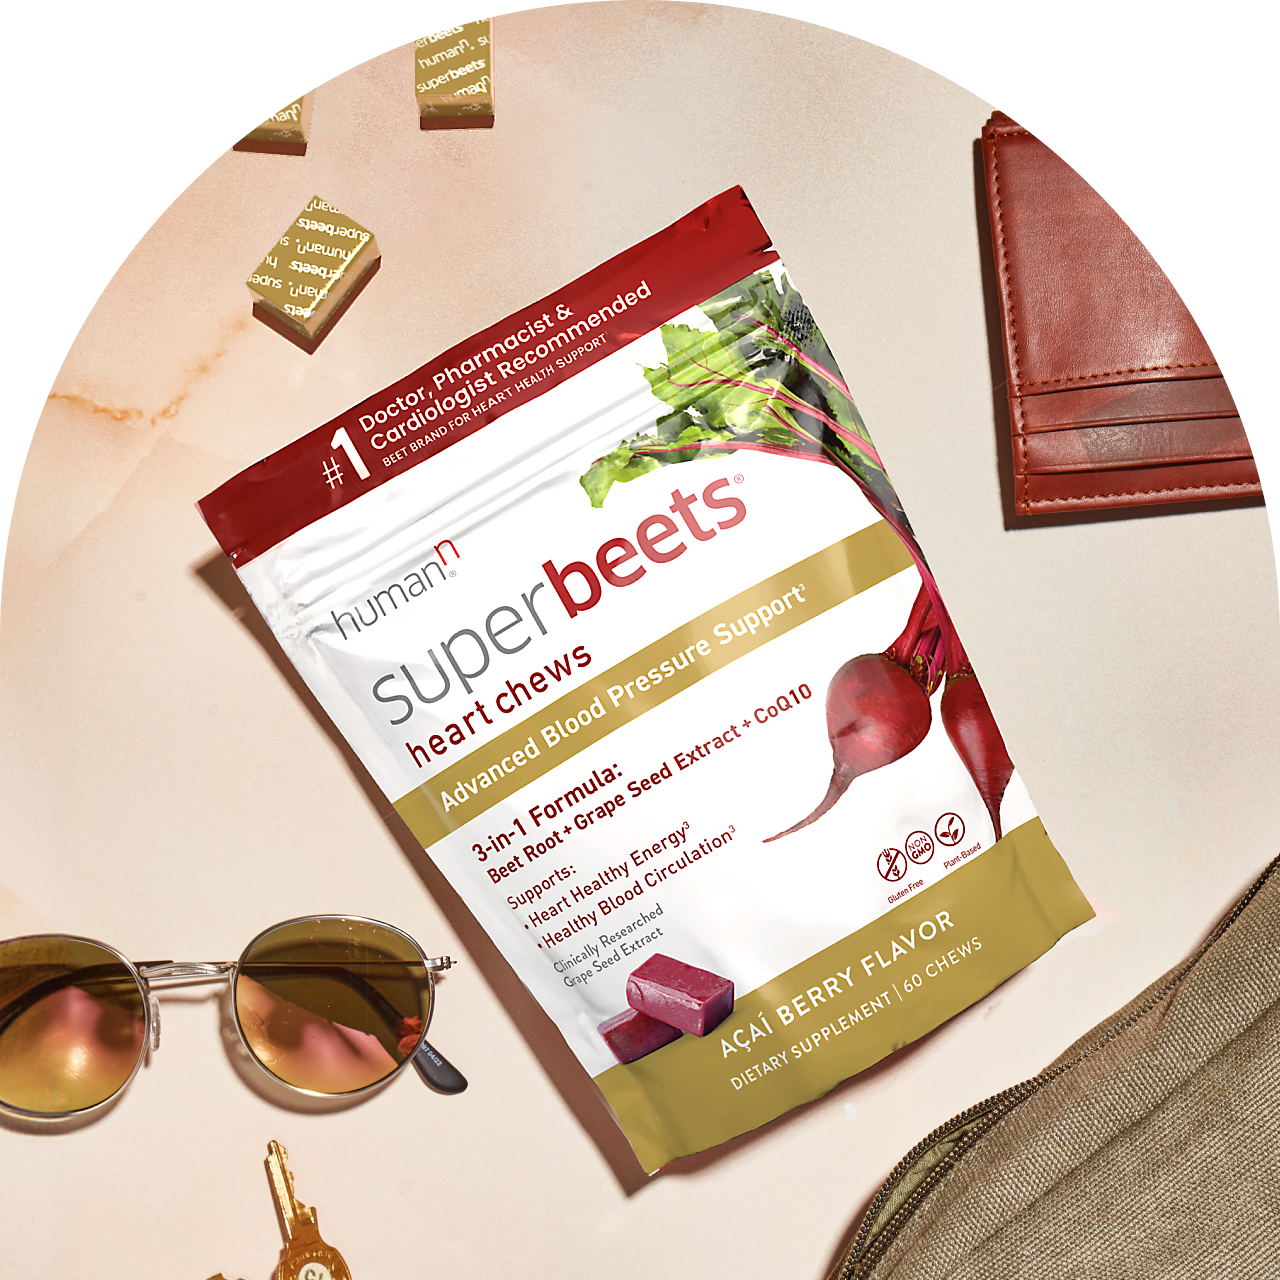 Superbeets Heart Chews Advanced package with gold wrapped chews. Sunglasses and a leather wallet are on either side.